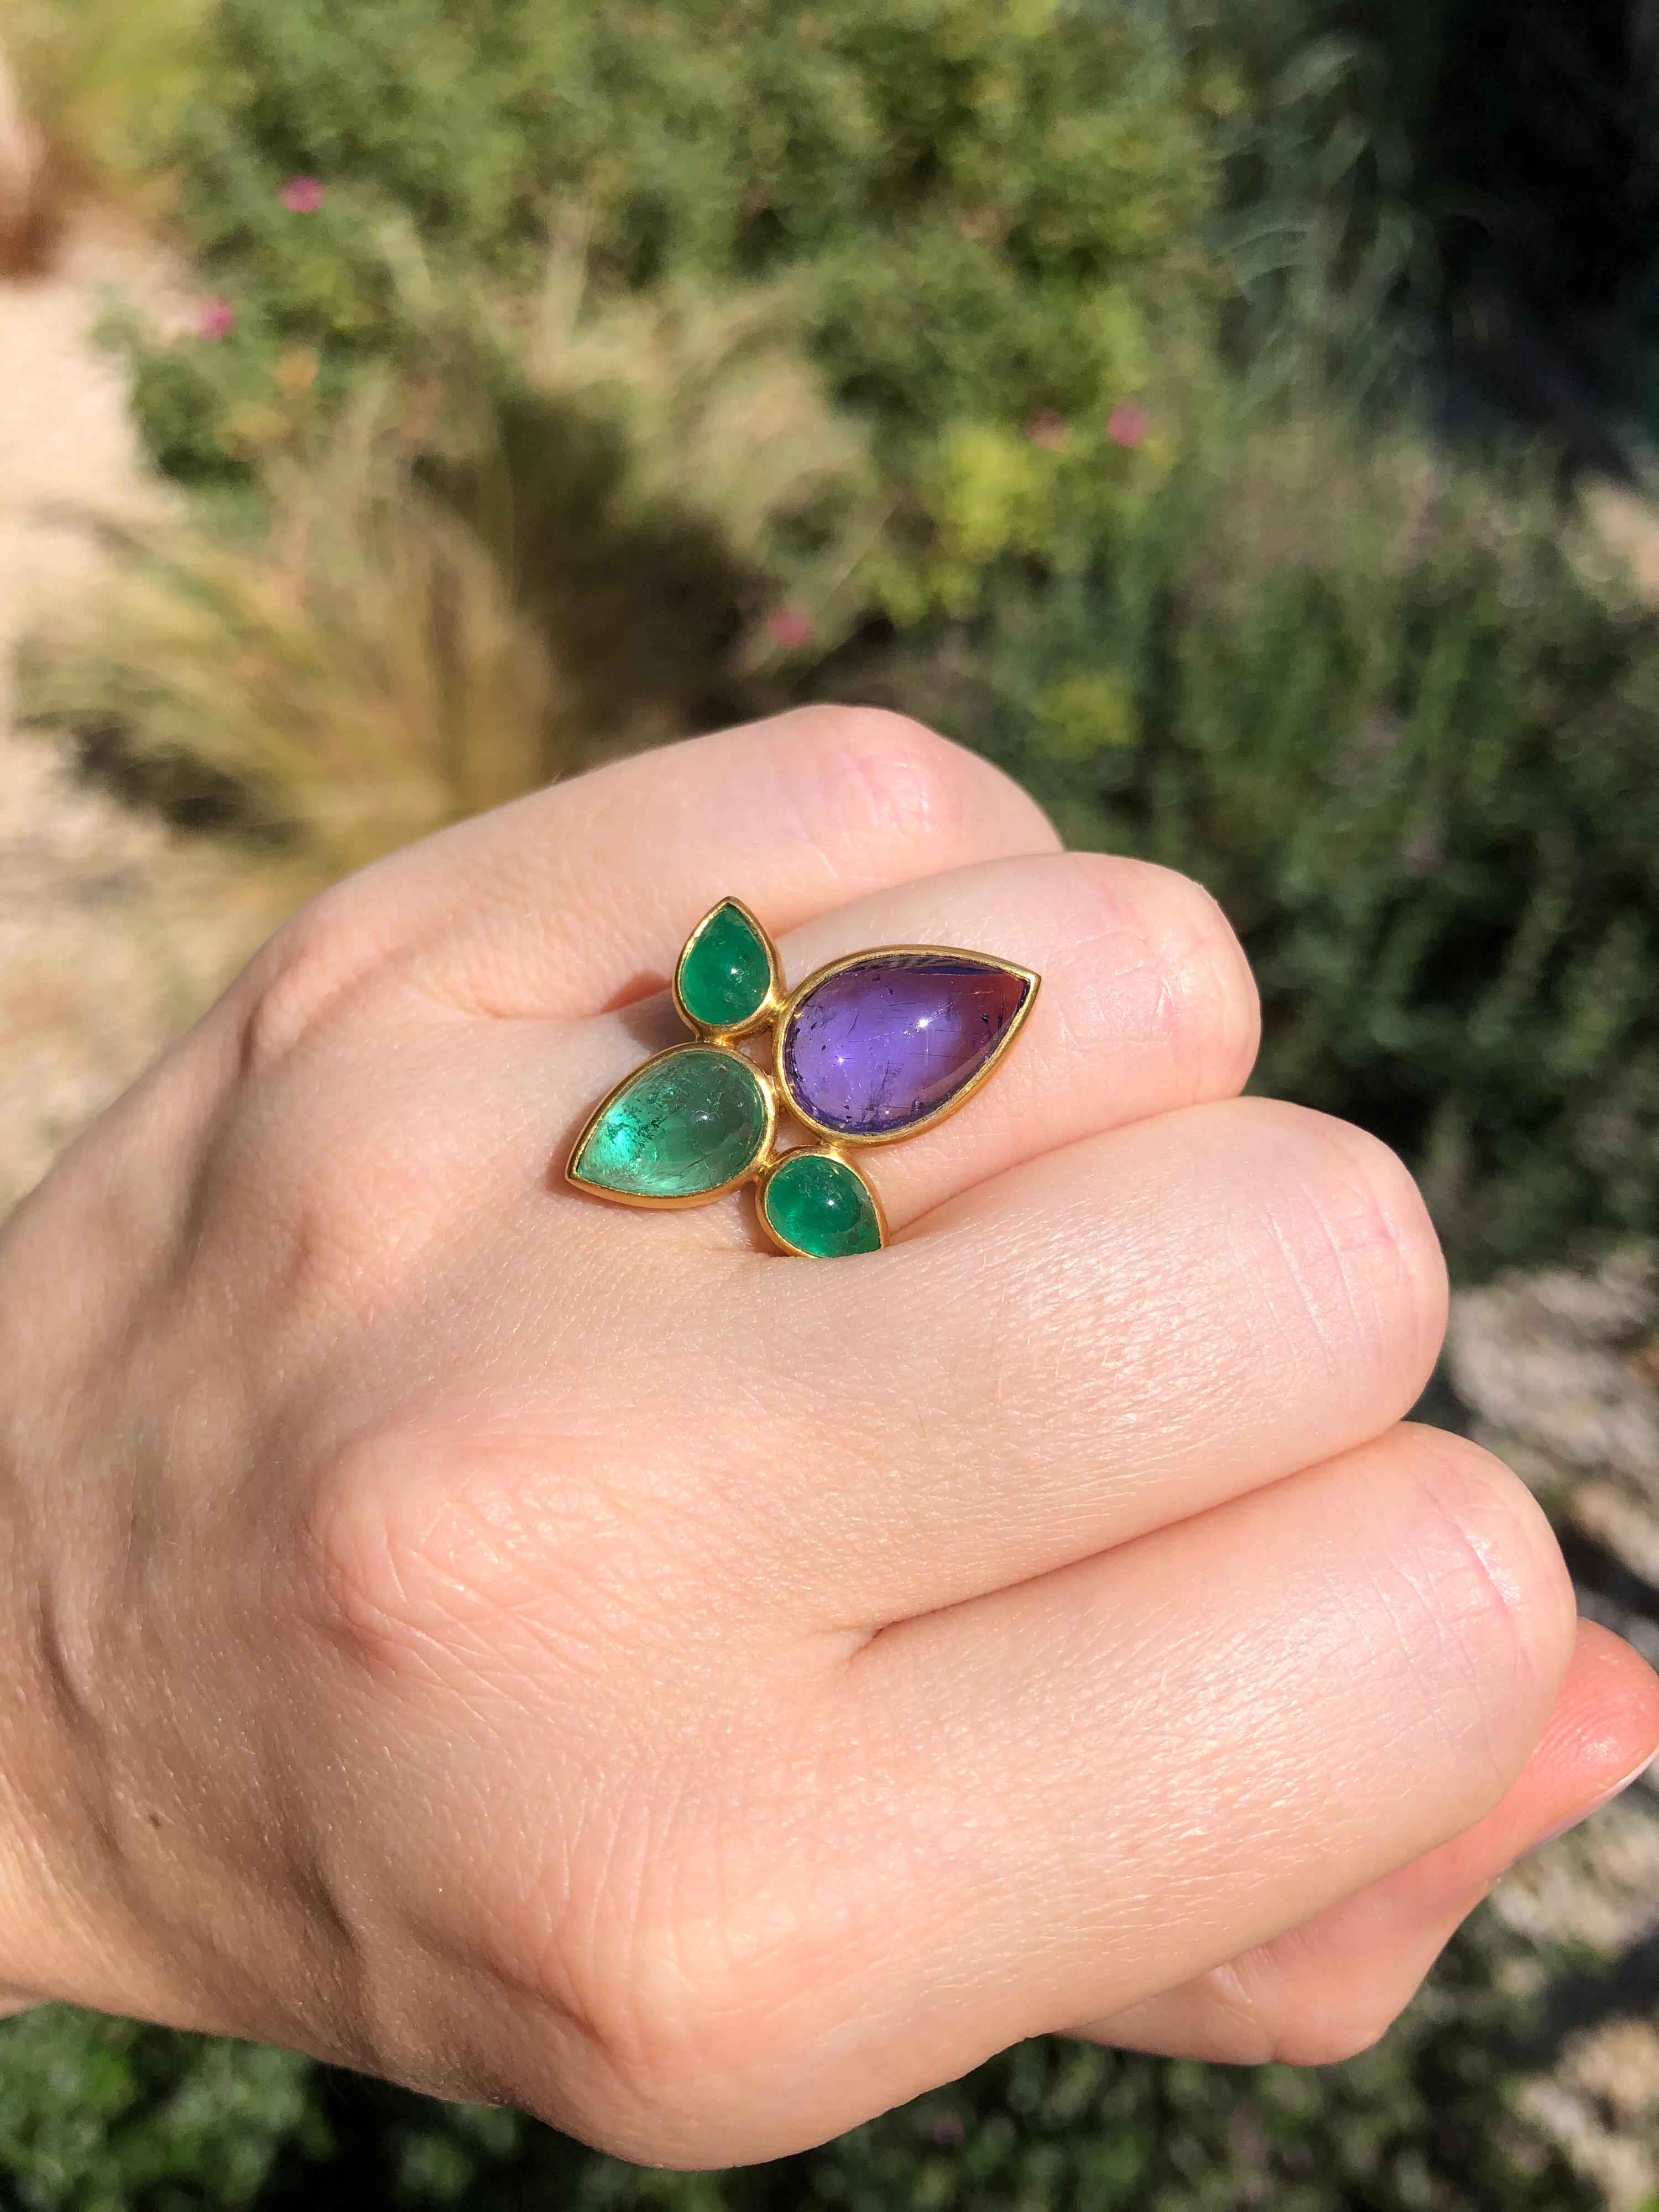 Contemporary Scrives 5.9 cts Tanzanite 5 cts Emeralds Lotus Flower 22Karat Gold Cocktail Ring